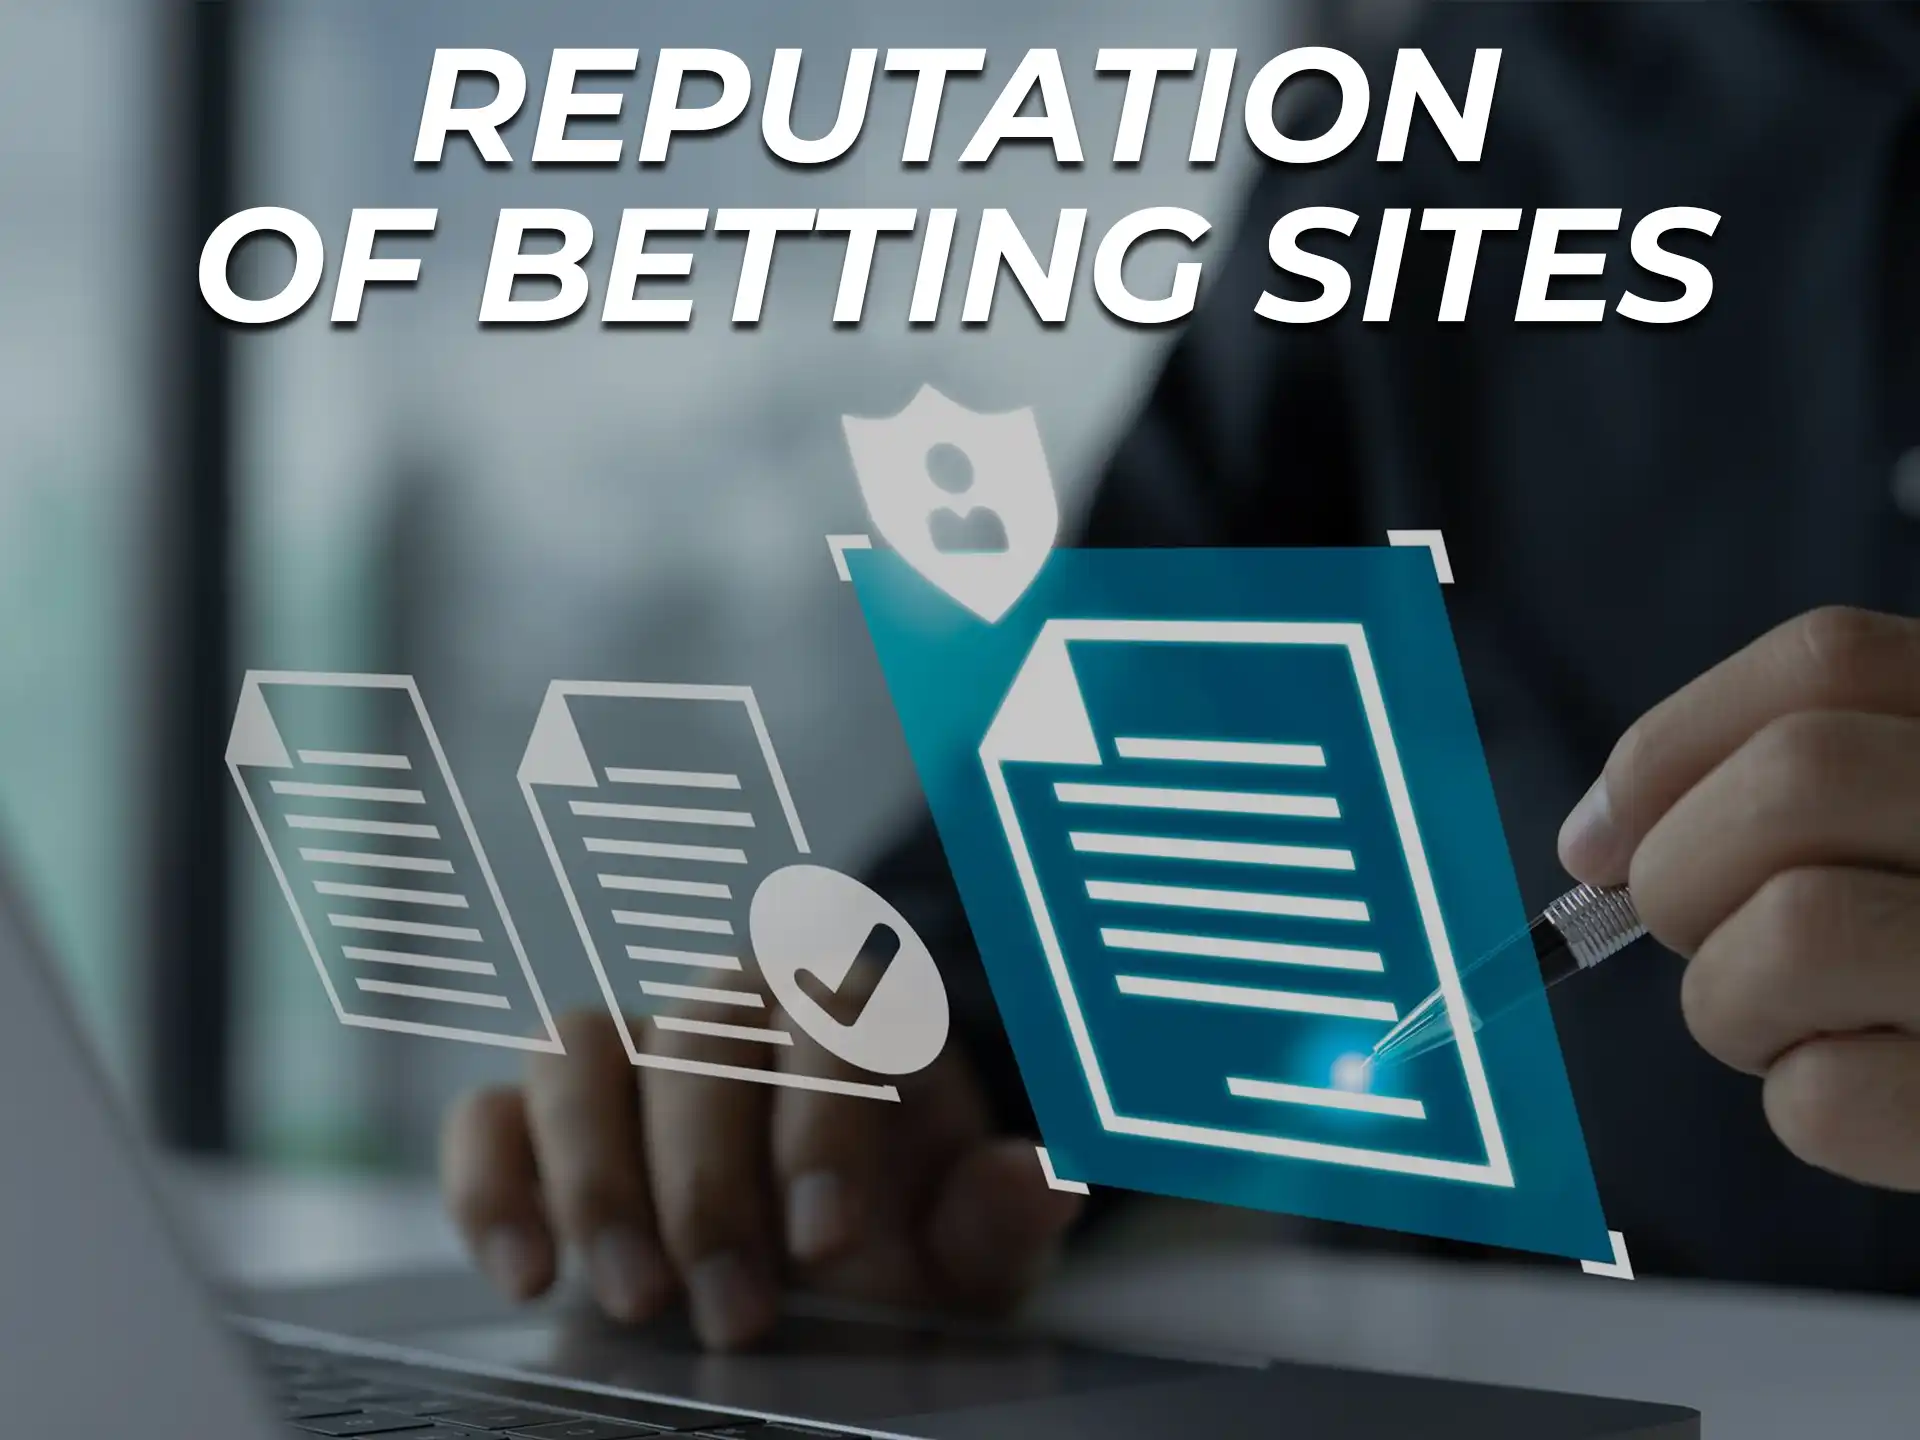 Recommends that you choose betting sites that have the appropriate license, as well as explore user reviews and ratings of bookmakers.